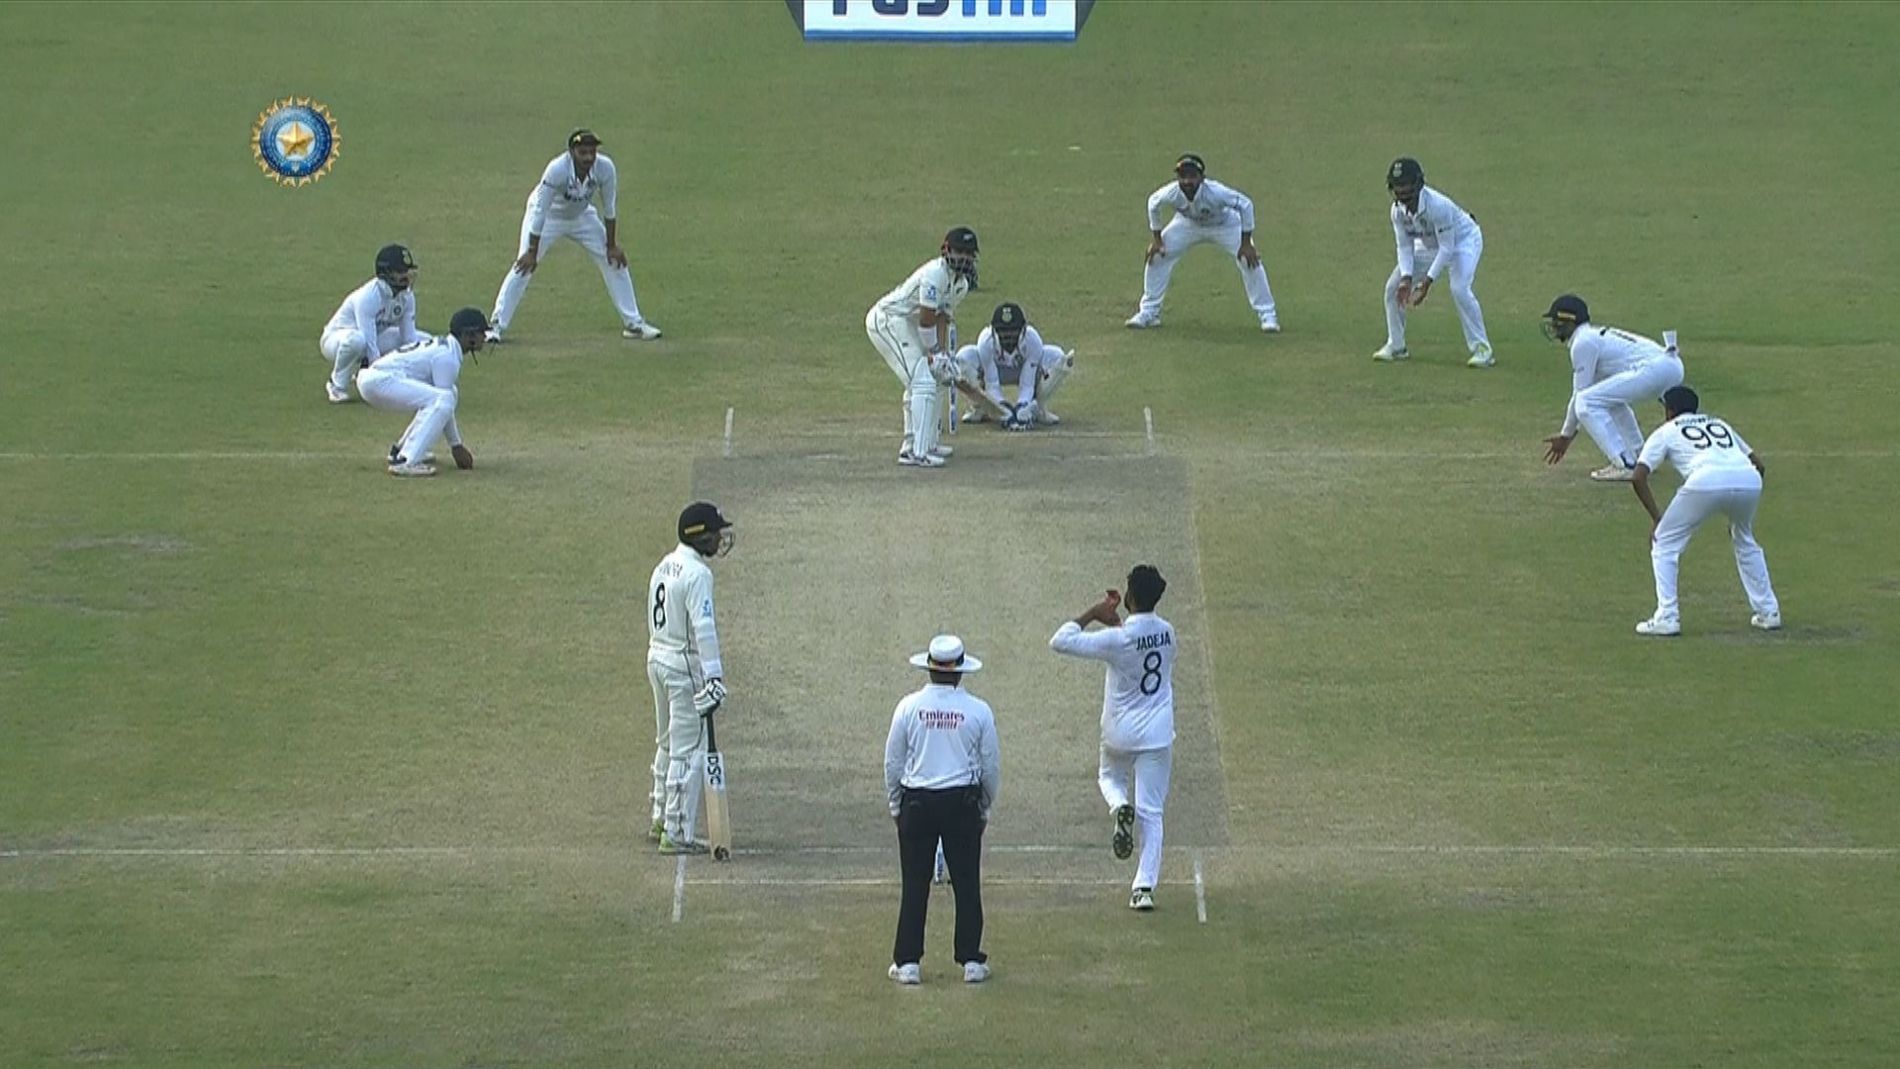 Ravindra Jadeja bowling to New Zealand&#039;s Ajaz Patel in the dying moments of the Kanpur Test. Pic: BCCI